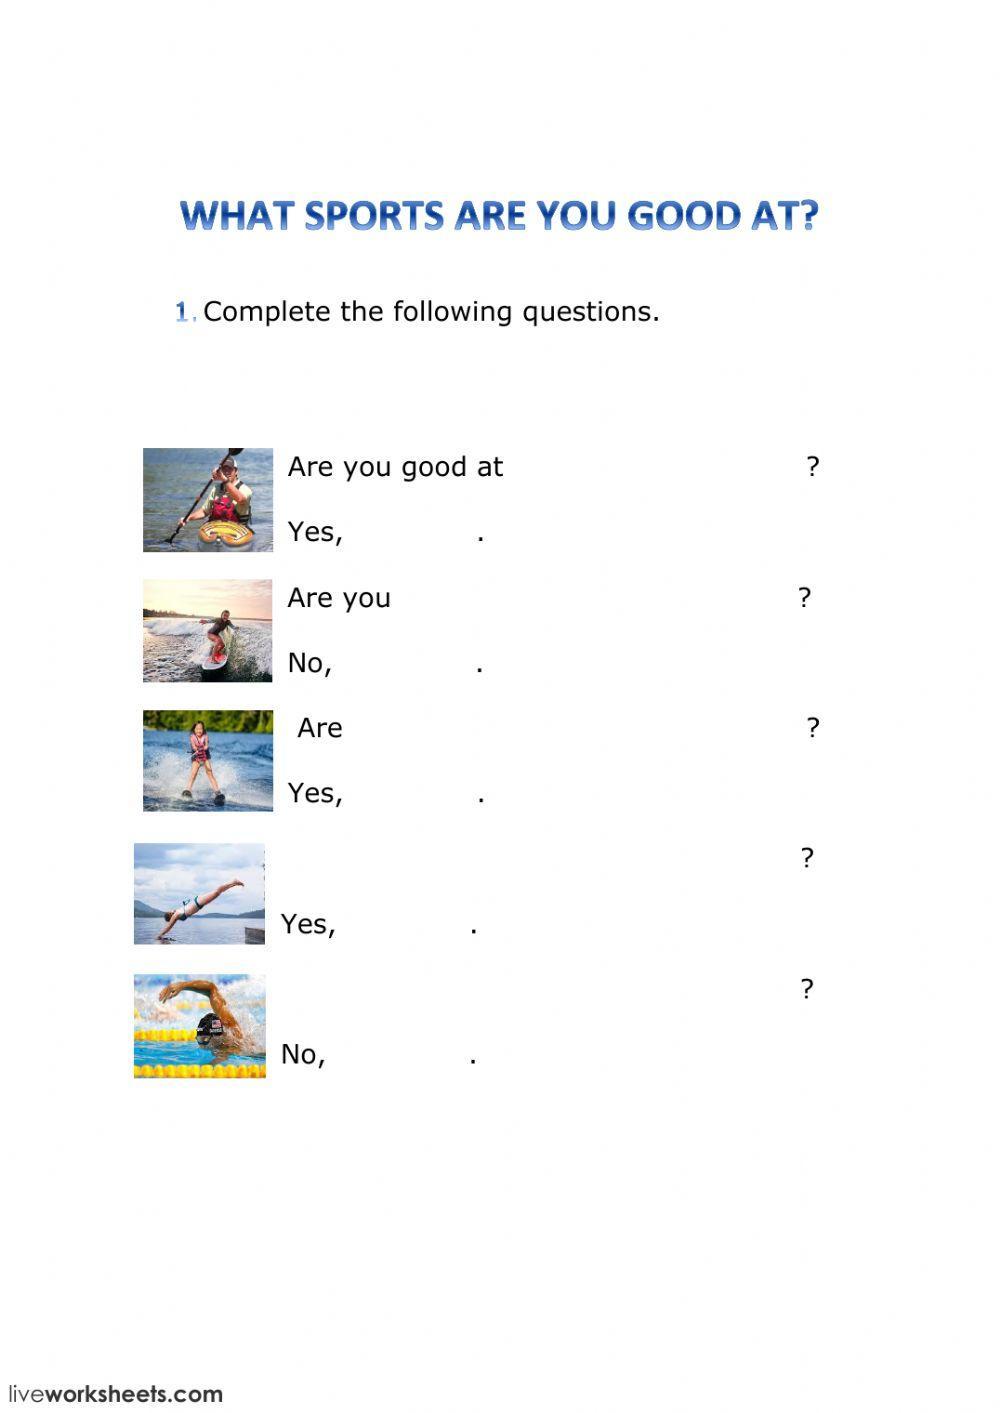 What sports are you at